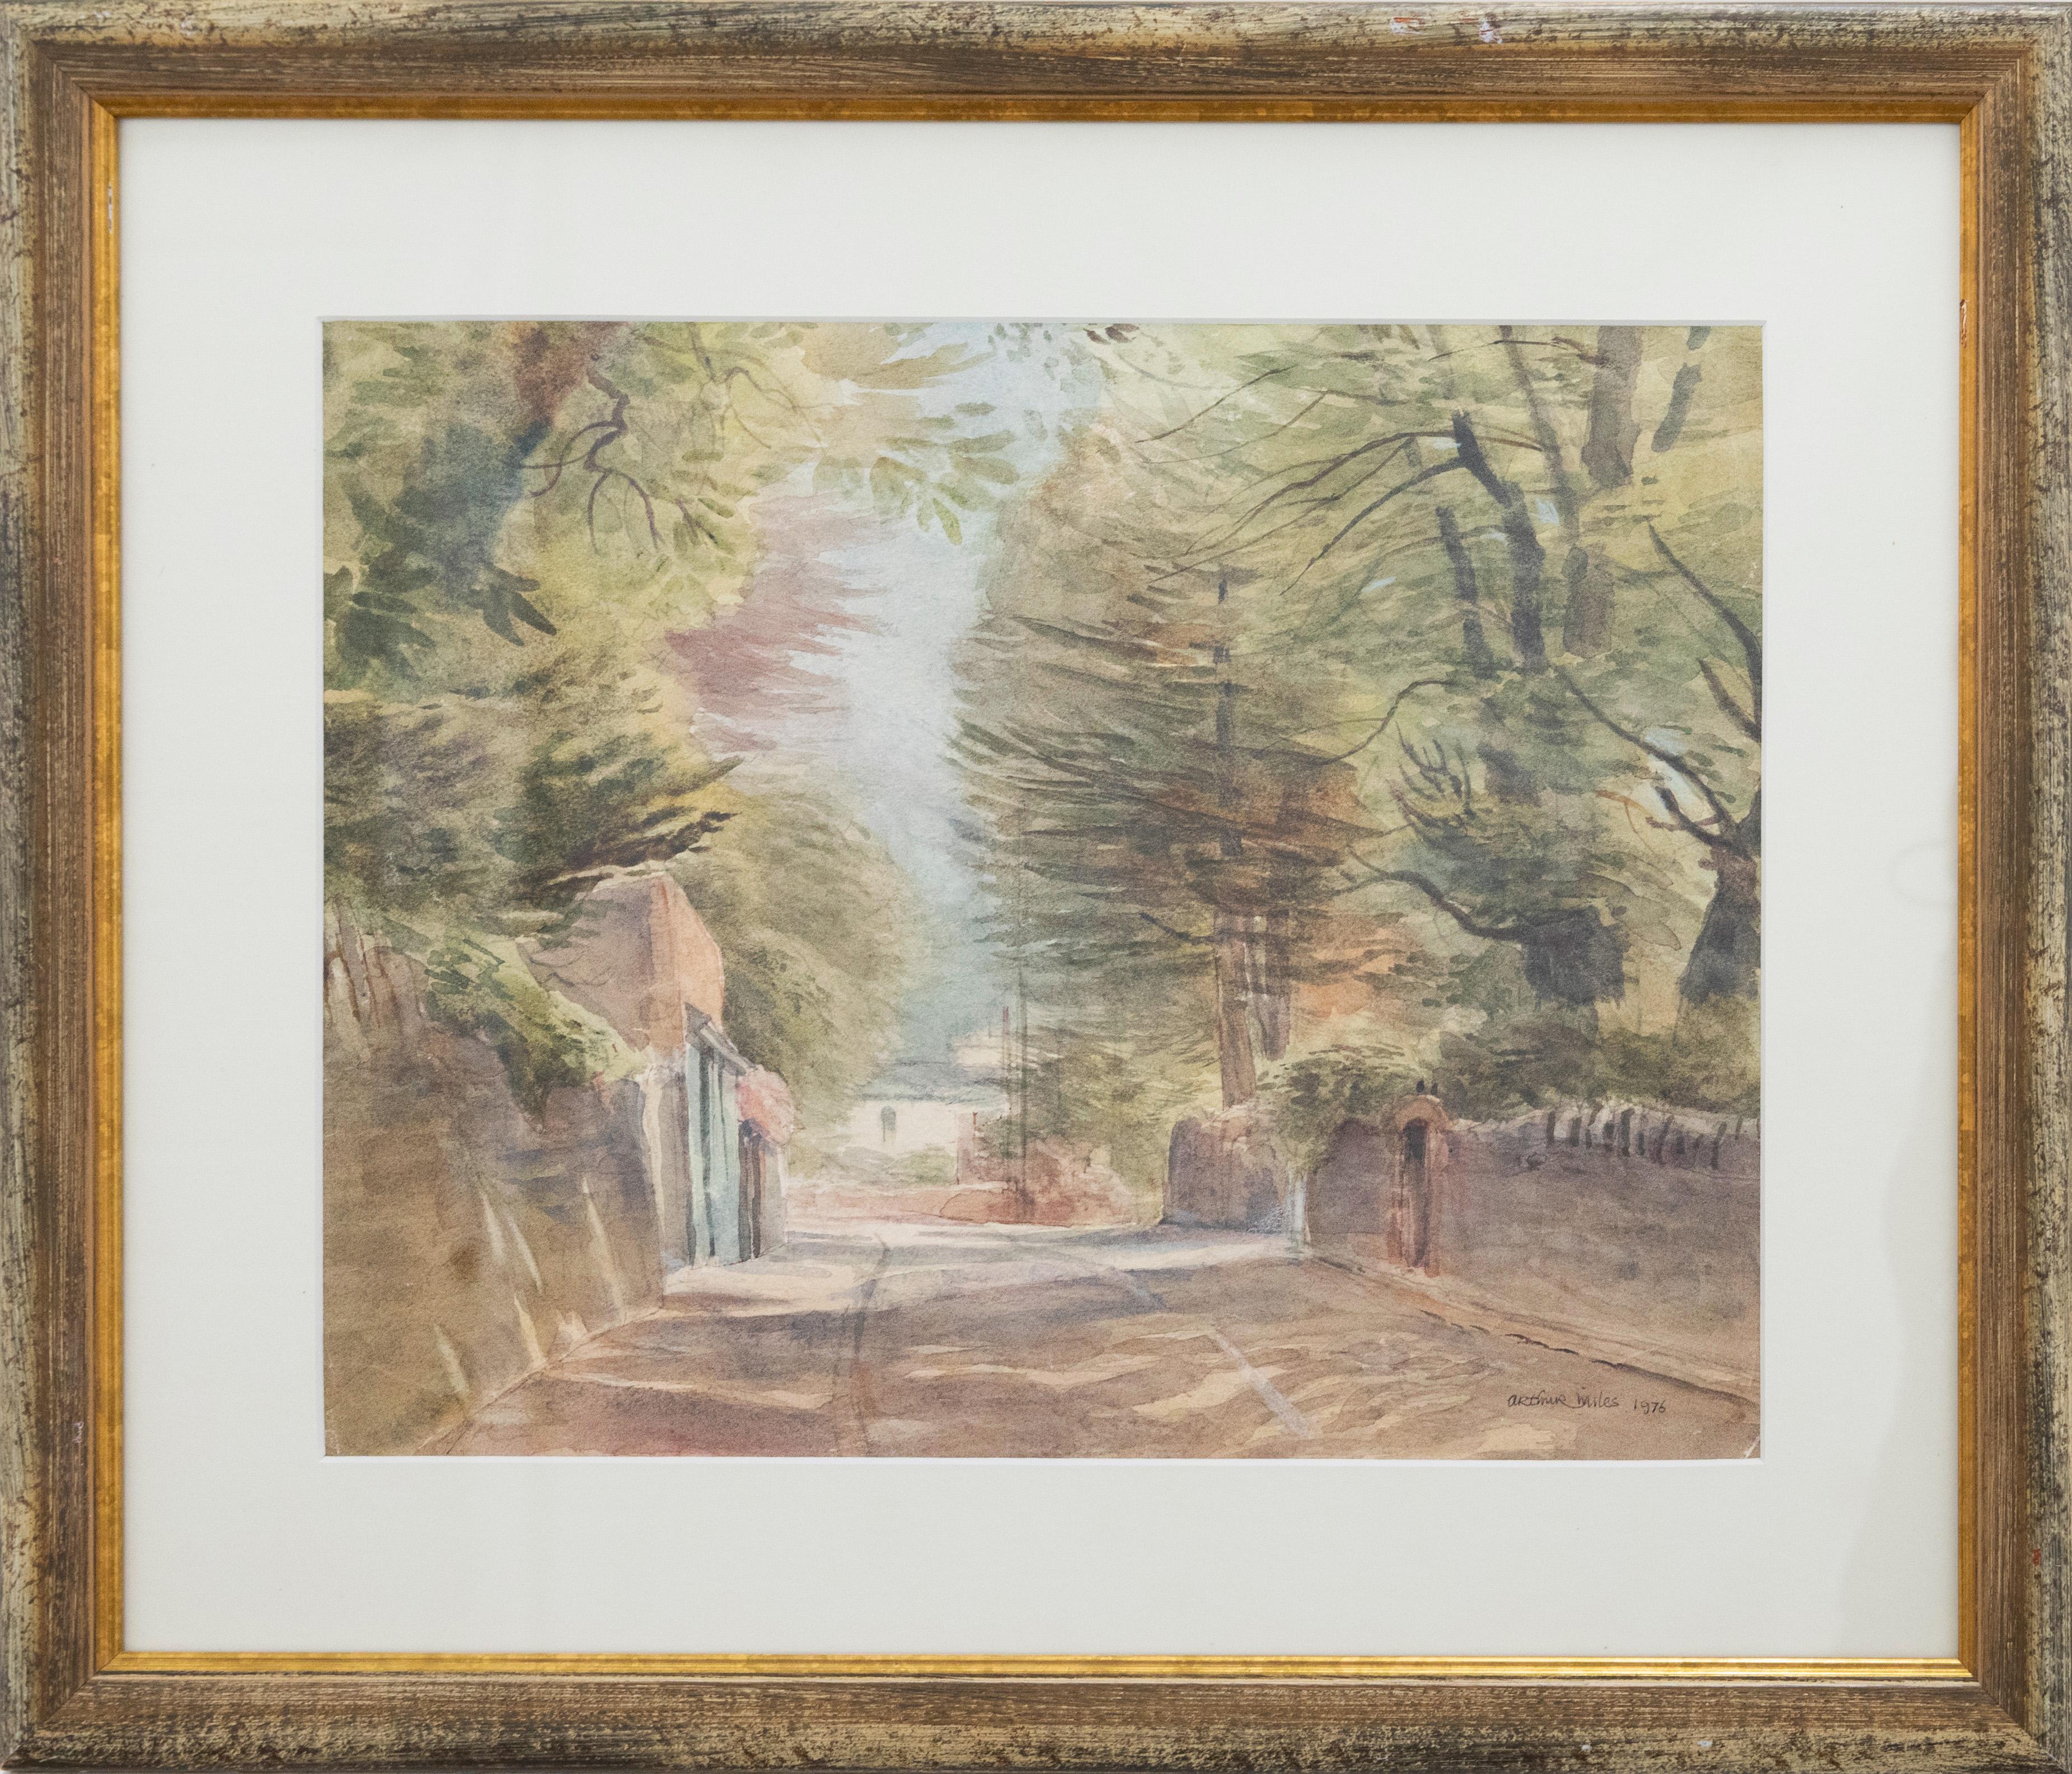 A charming watercolour study of a quiet roadway through a village, with stone walls and trees on either side. Signed and dated to the lower right. Well-presented in a contemporary frame with a new card mount. On paper. 